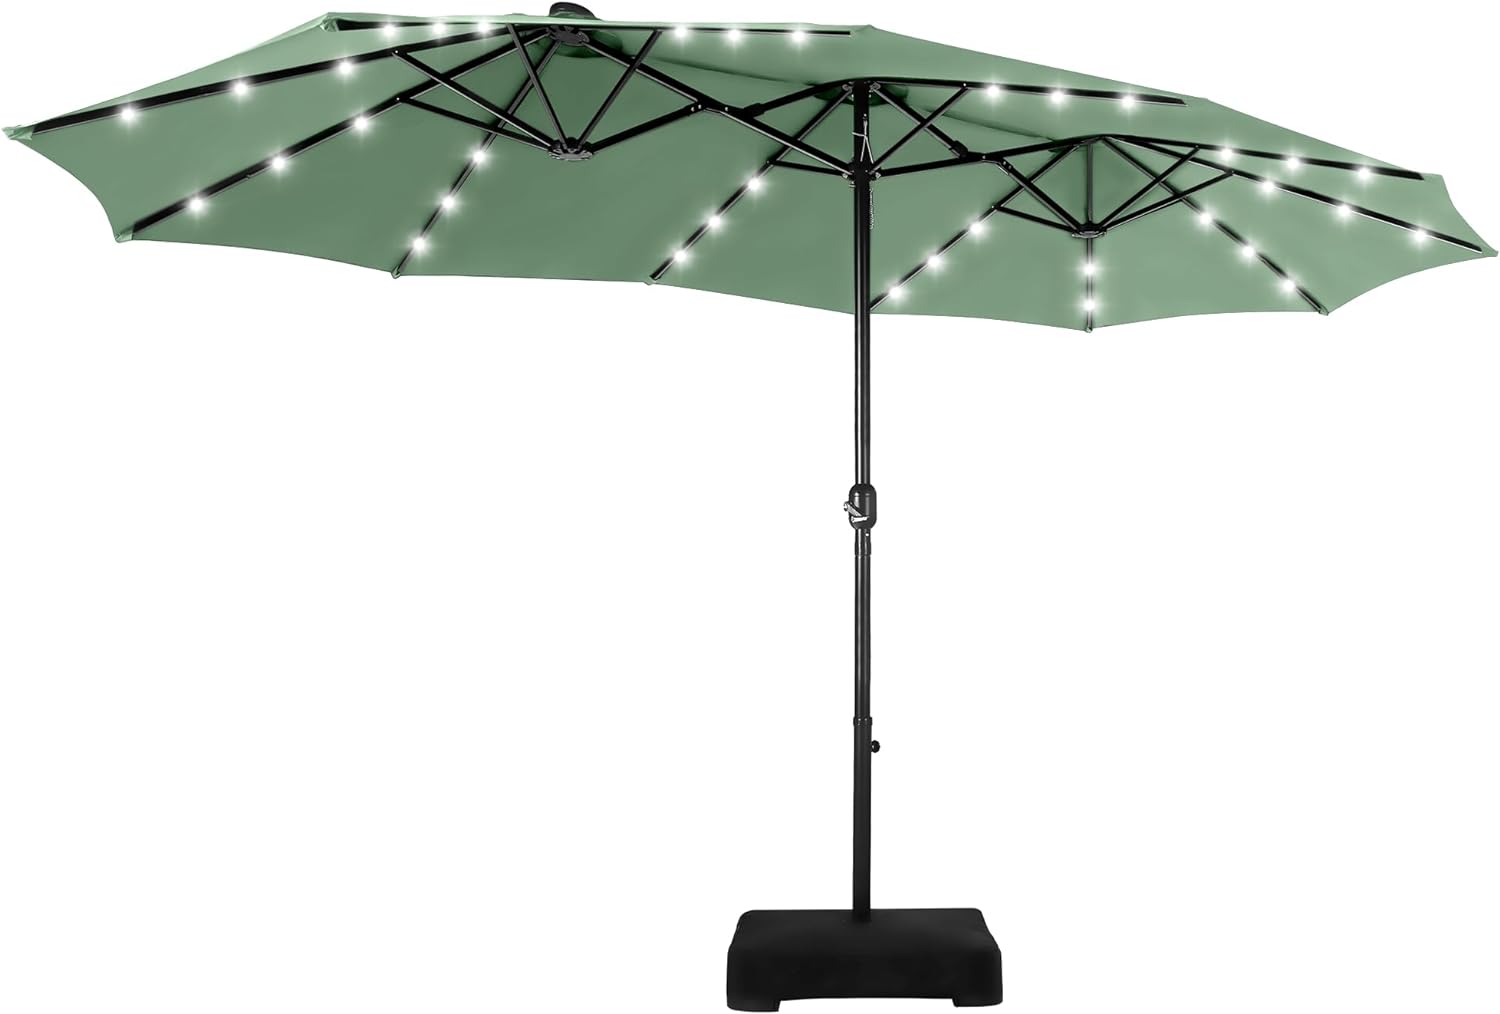 MFSTUDIO 15ft Double Sided Patio Umbrella with Solar Lights, Outdoor Large Rectangular Market Umbrellas with Base Included, Crank Handle and 36 LED Lights for Deck Pool Shade